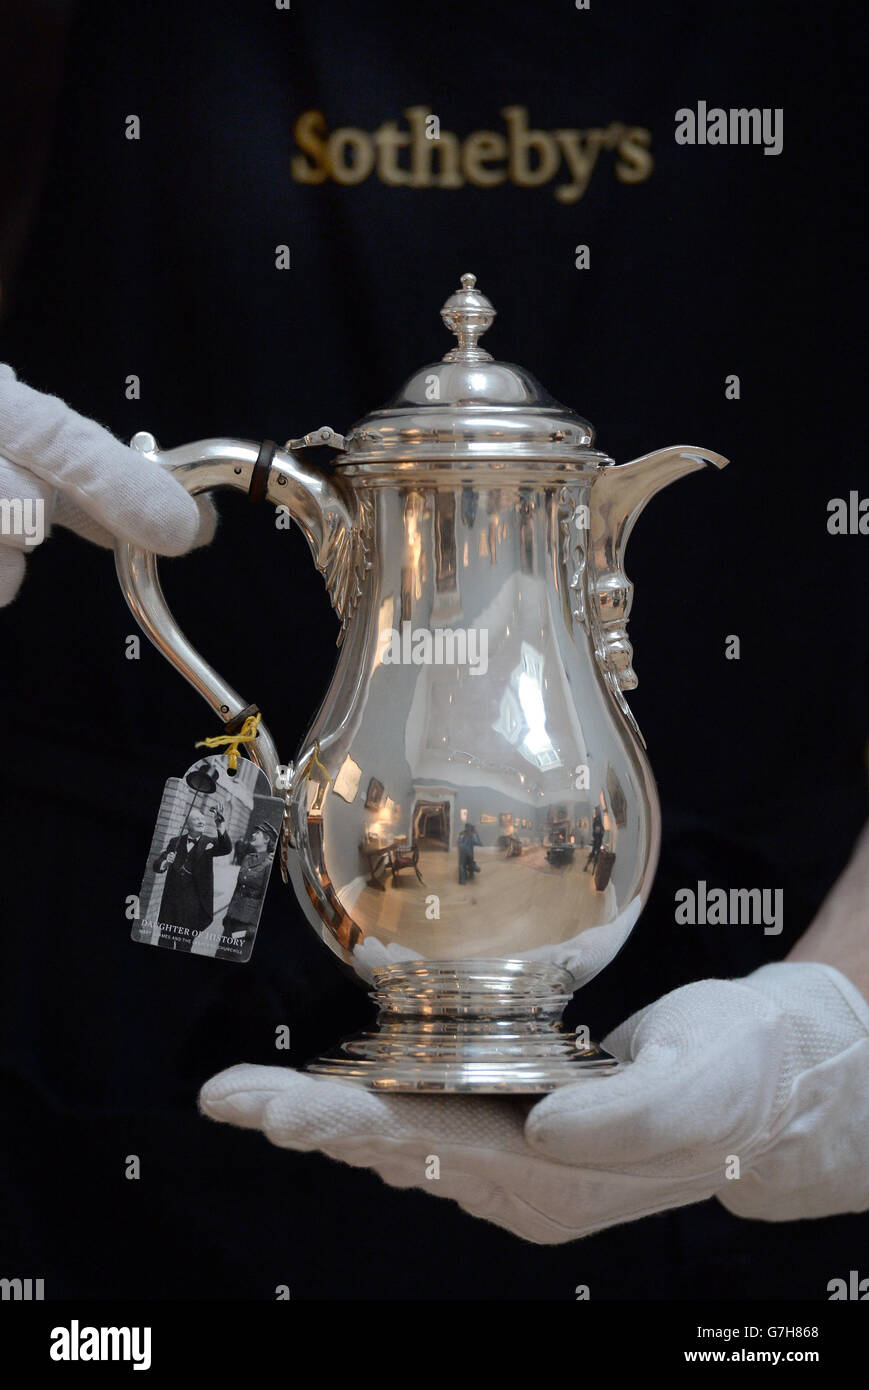 The War Cabinet Jug by Comyms & Son 1942 is displayed during the press viewing of Daughter of History, Mary Soames and the Legacy of Churchill at Sotheby's auction house, London. PRESS ASSOCIATION Photo Picture date: Friday December 12, 2014. Charting Lady Soames' life, the collection chronicles historical moments of the 20th Century, while also presenting an intimate portrait of Winston Churchill and his family. Photo credit should read: Anthony Devlin/PA Wire Stock Photo